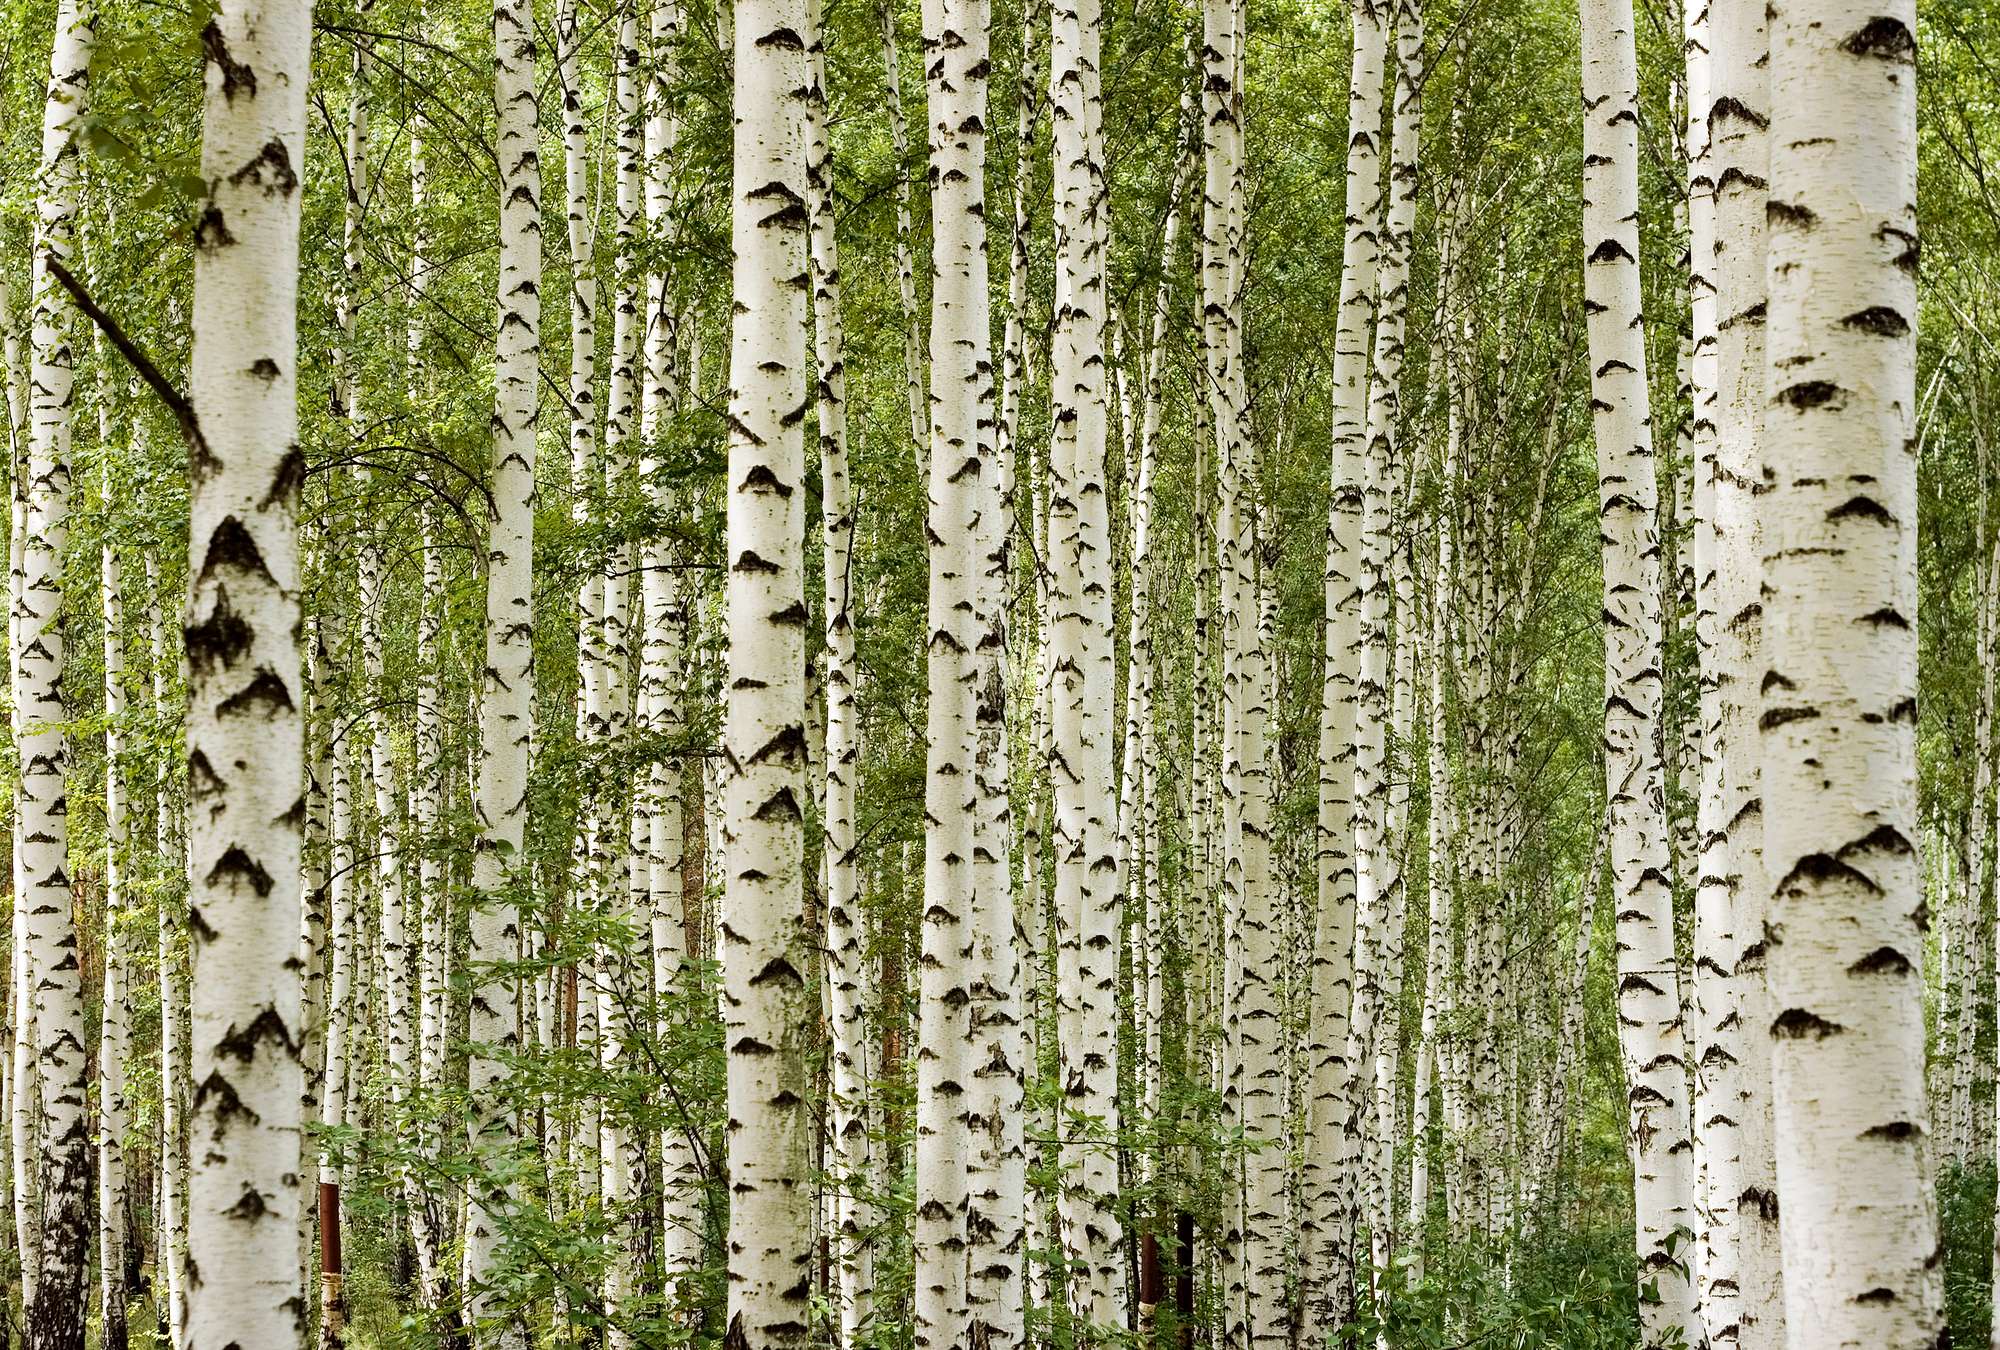             Birch forest mural with 3D effect & natural look
        